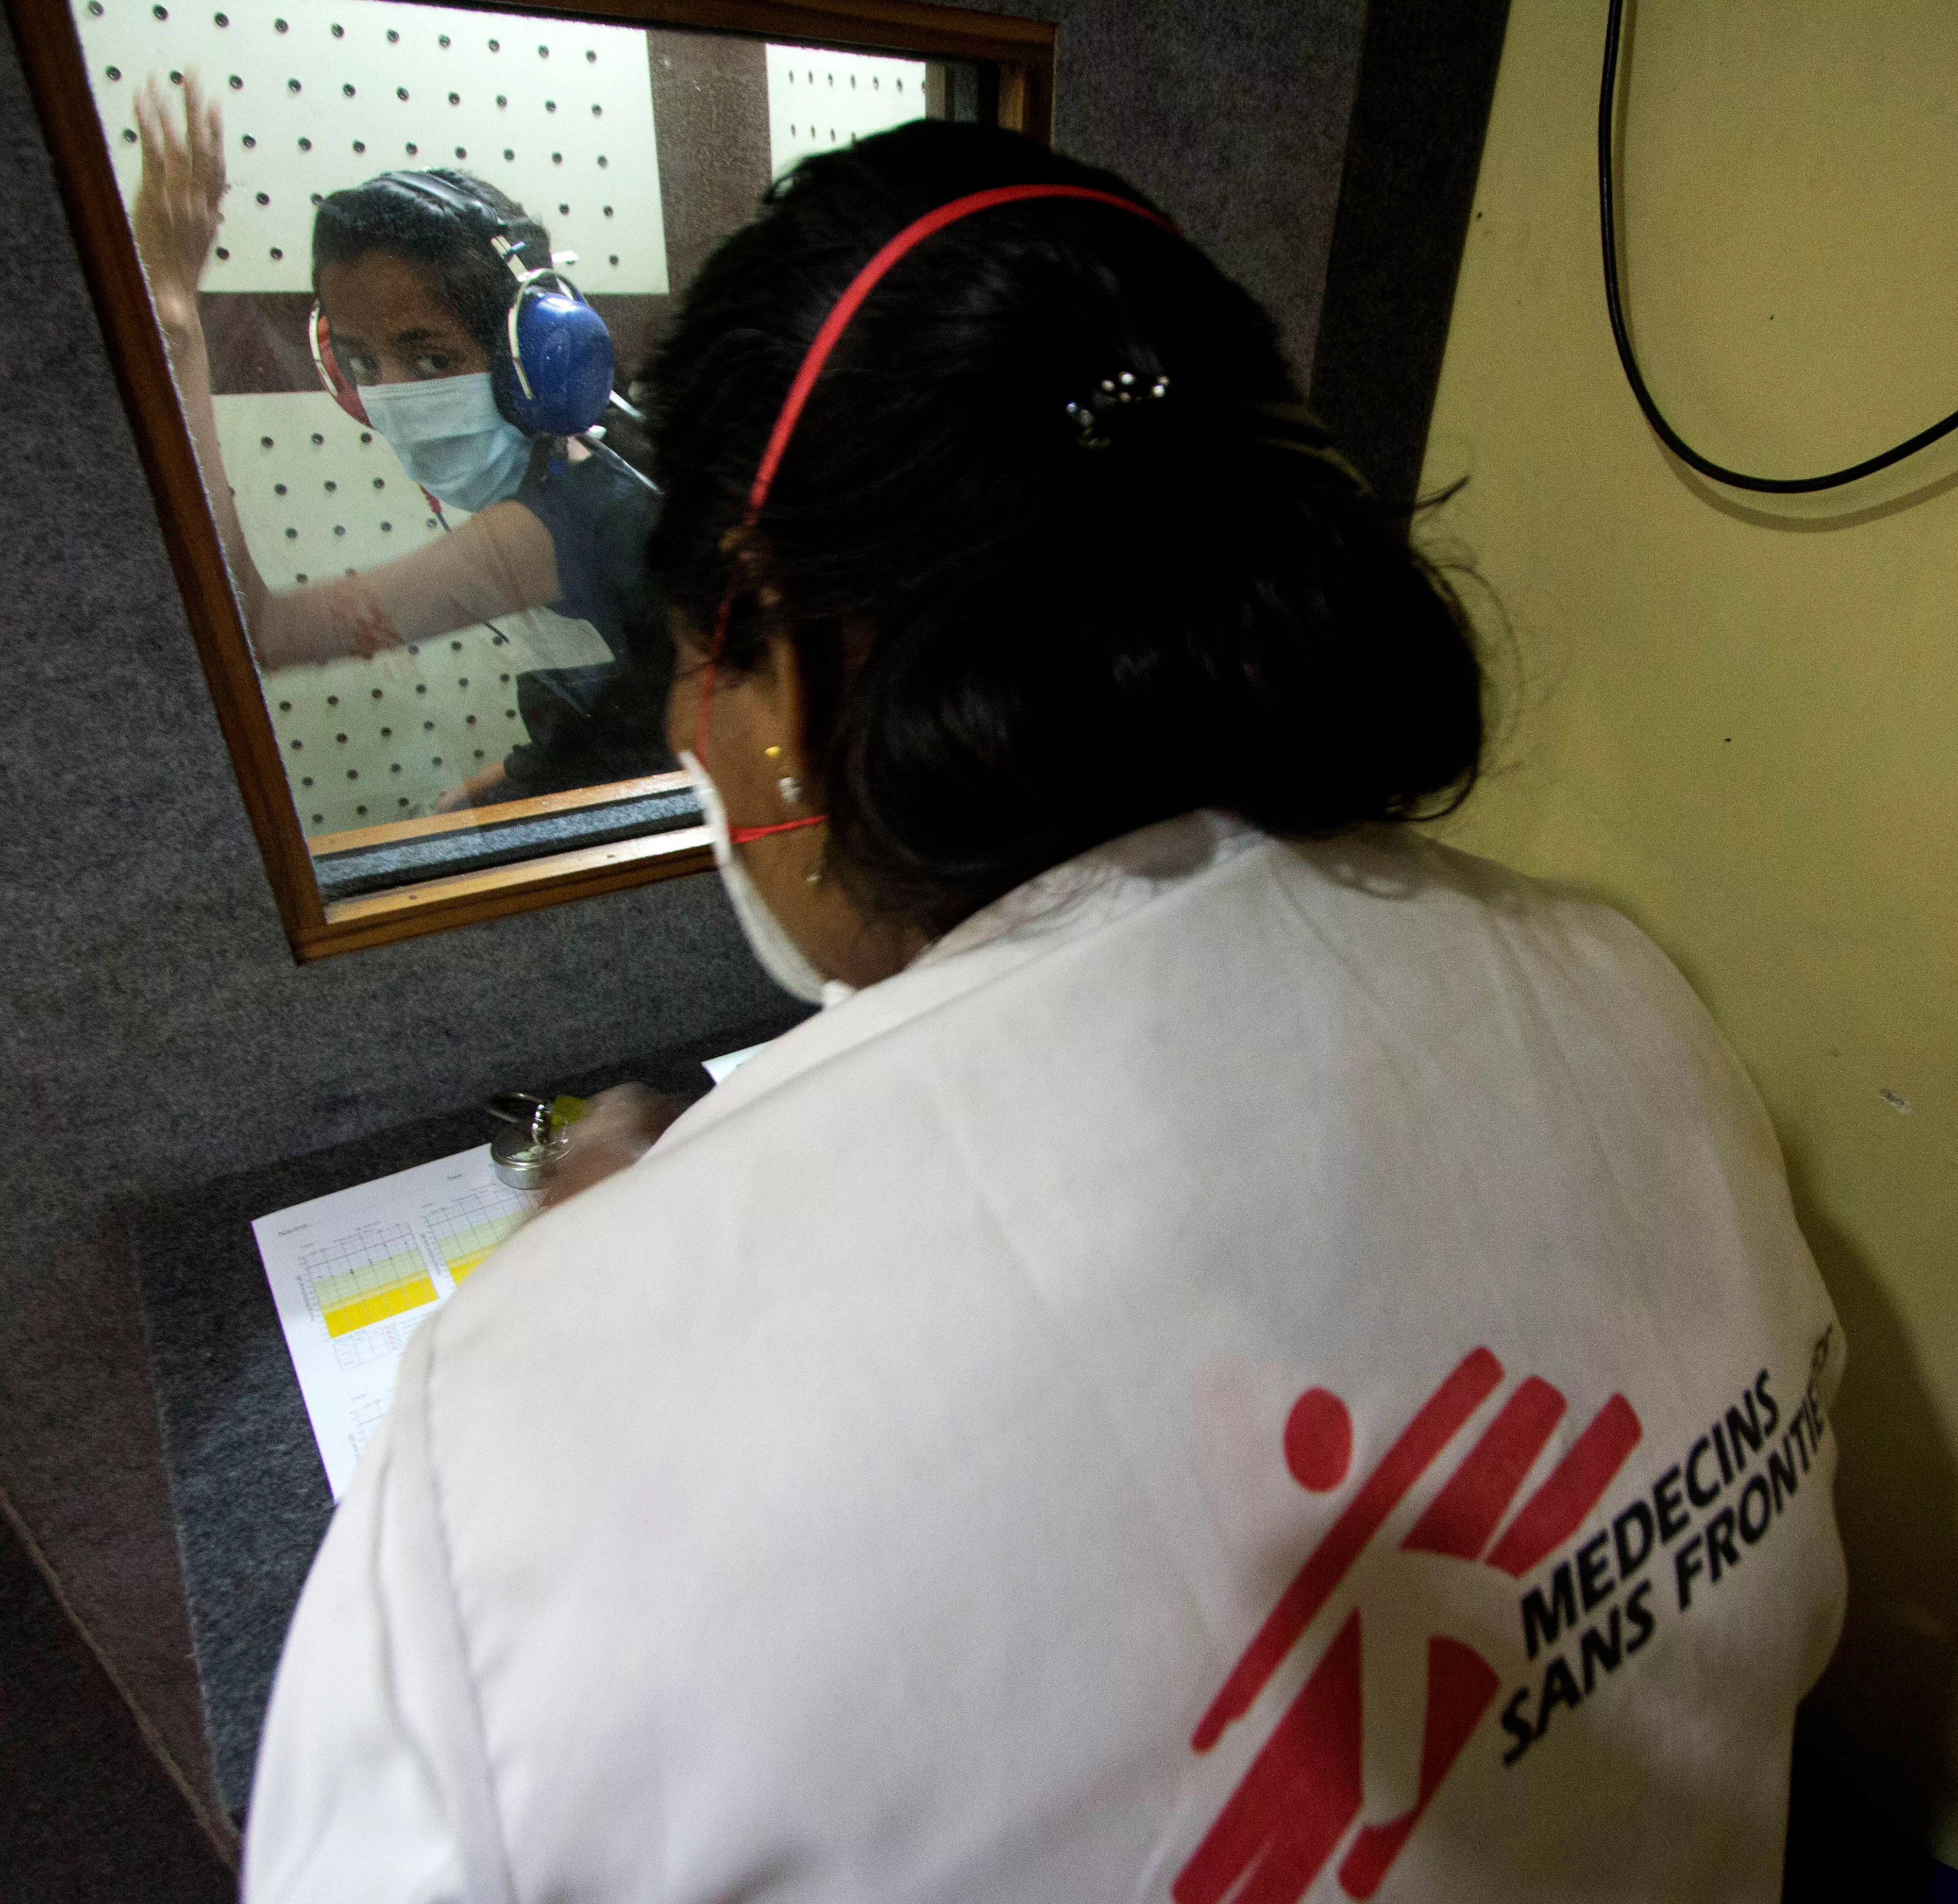 An Extensively Drug Resistant Tuberculosis (XDR-TB) patient undergoing an audiometry test to assess the hearing ability, as hearing loss is one of the side-effects of DRTB drugs